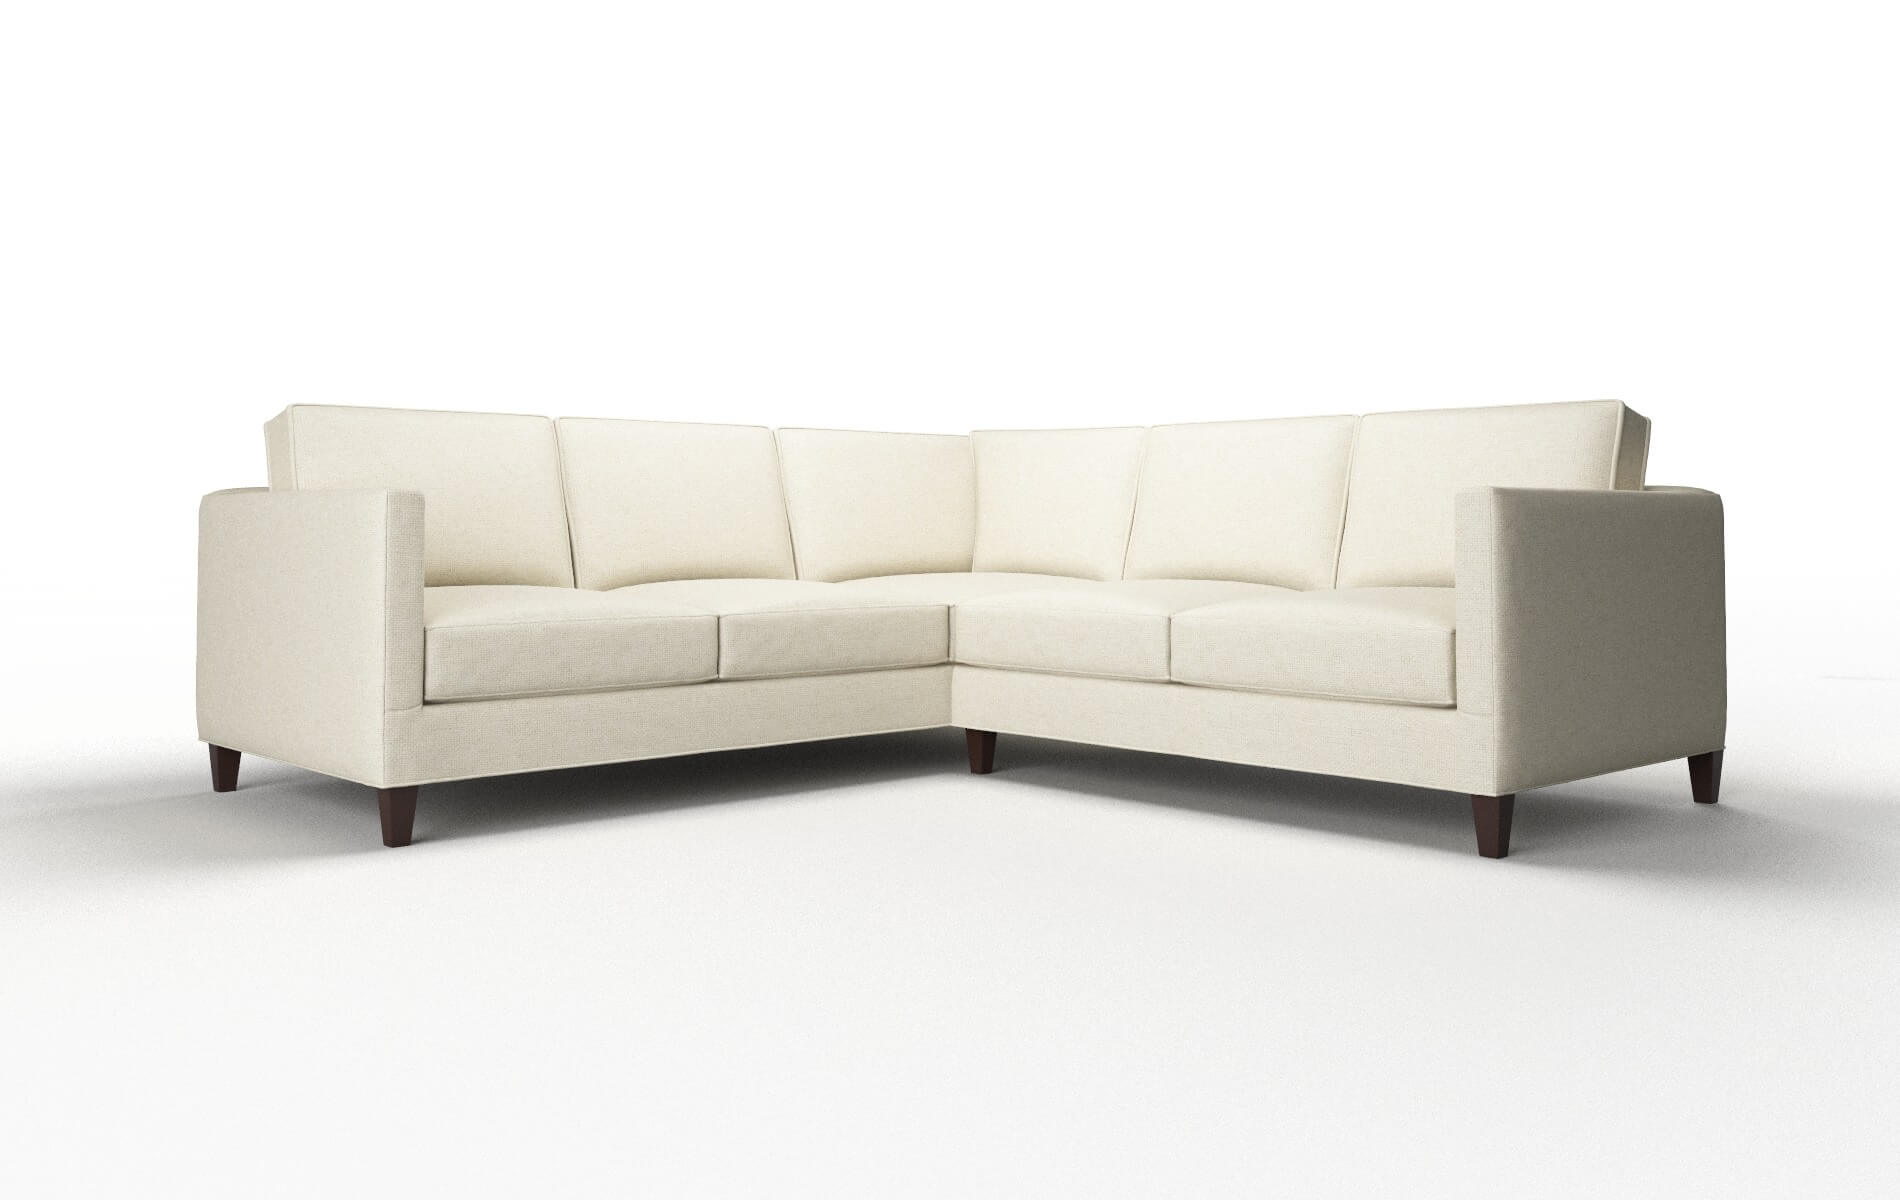 Alps Redondo Oyster Sectional espresso legs 1